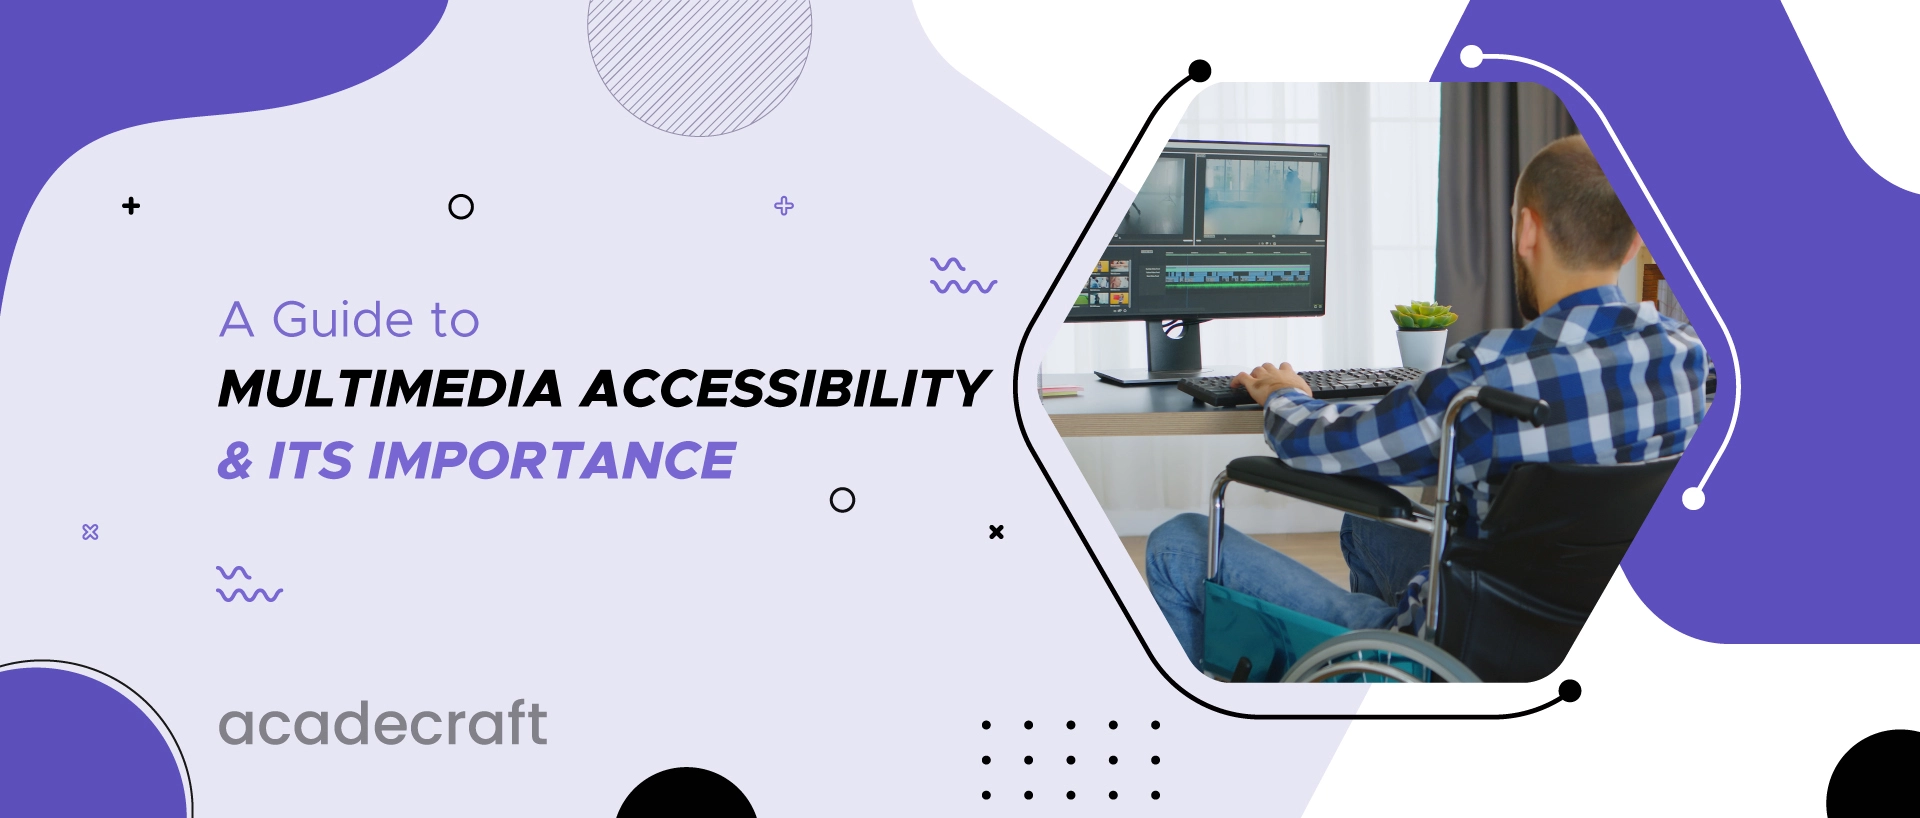 A Guide to Multimedia Accessibility & Its Importance